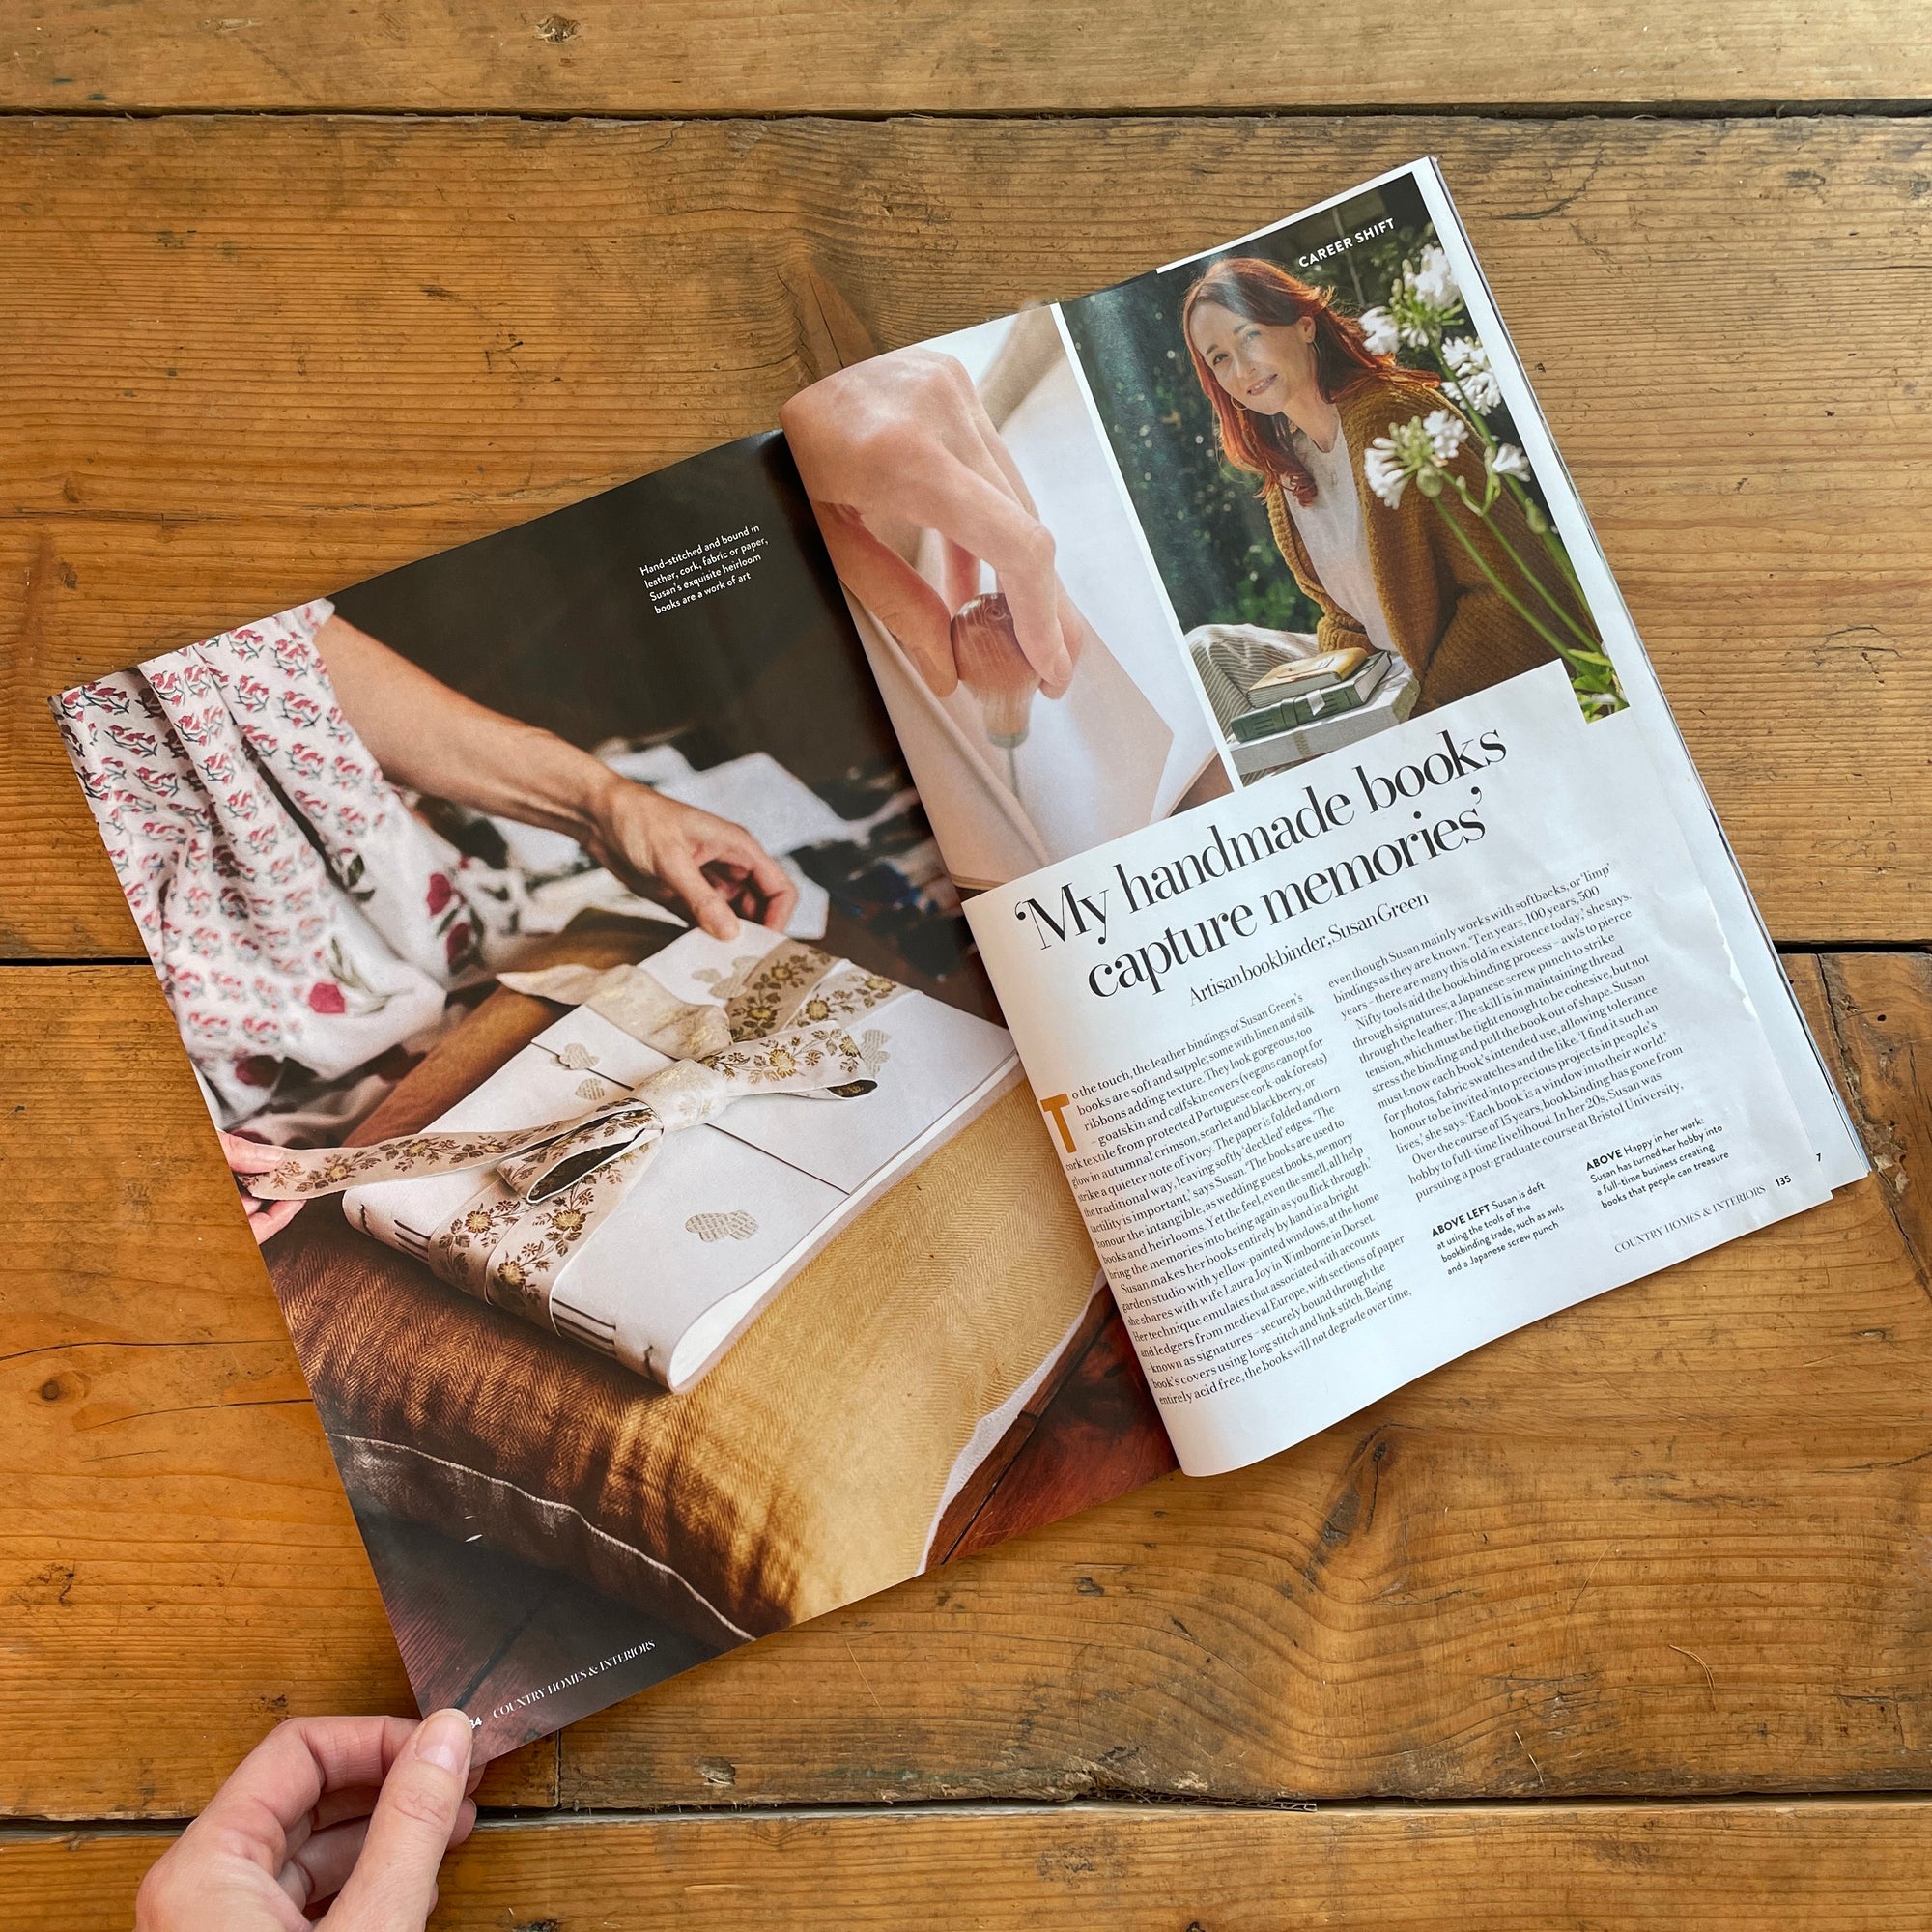 Career Shift: artisan bookbinder Susan Green in Country Homes and Interiors magazine